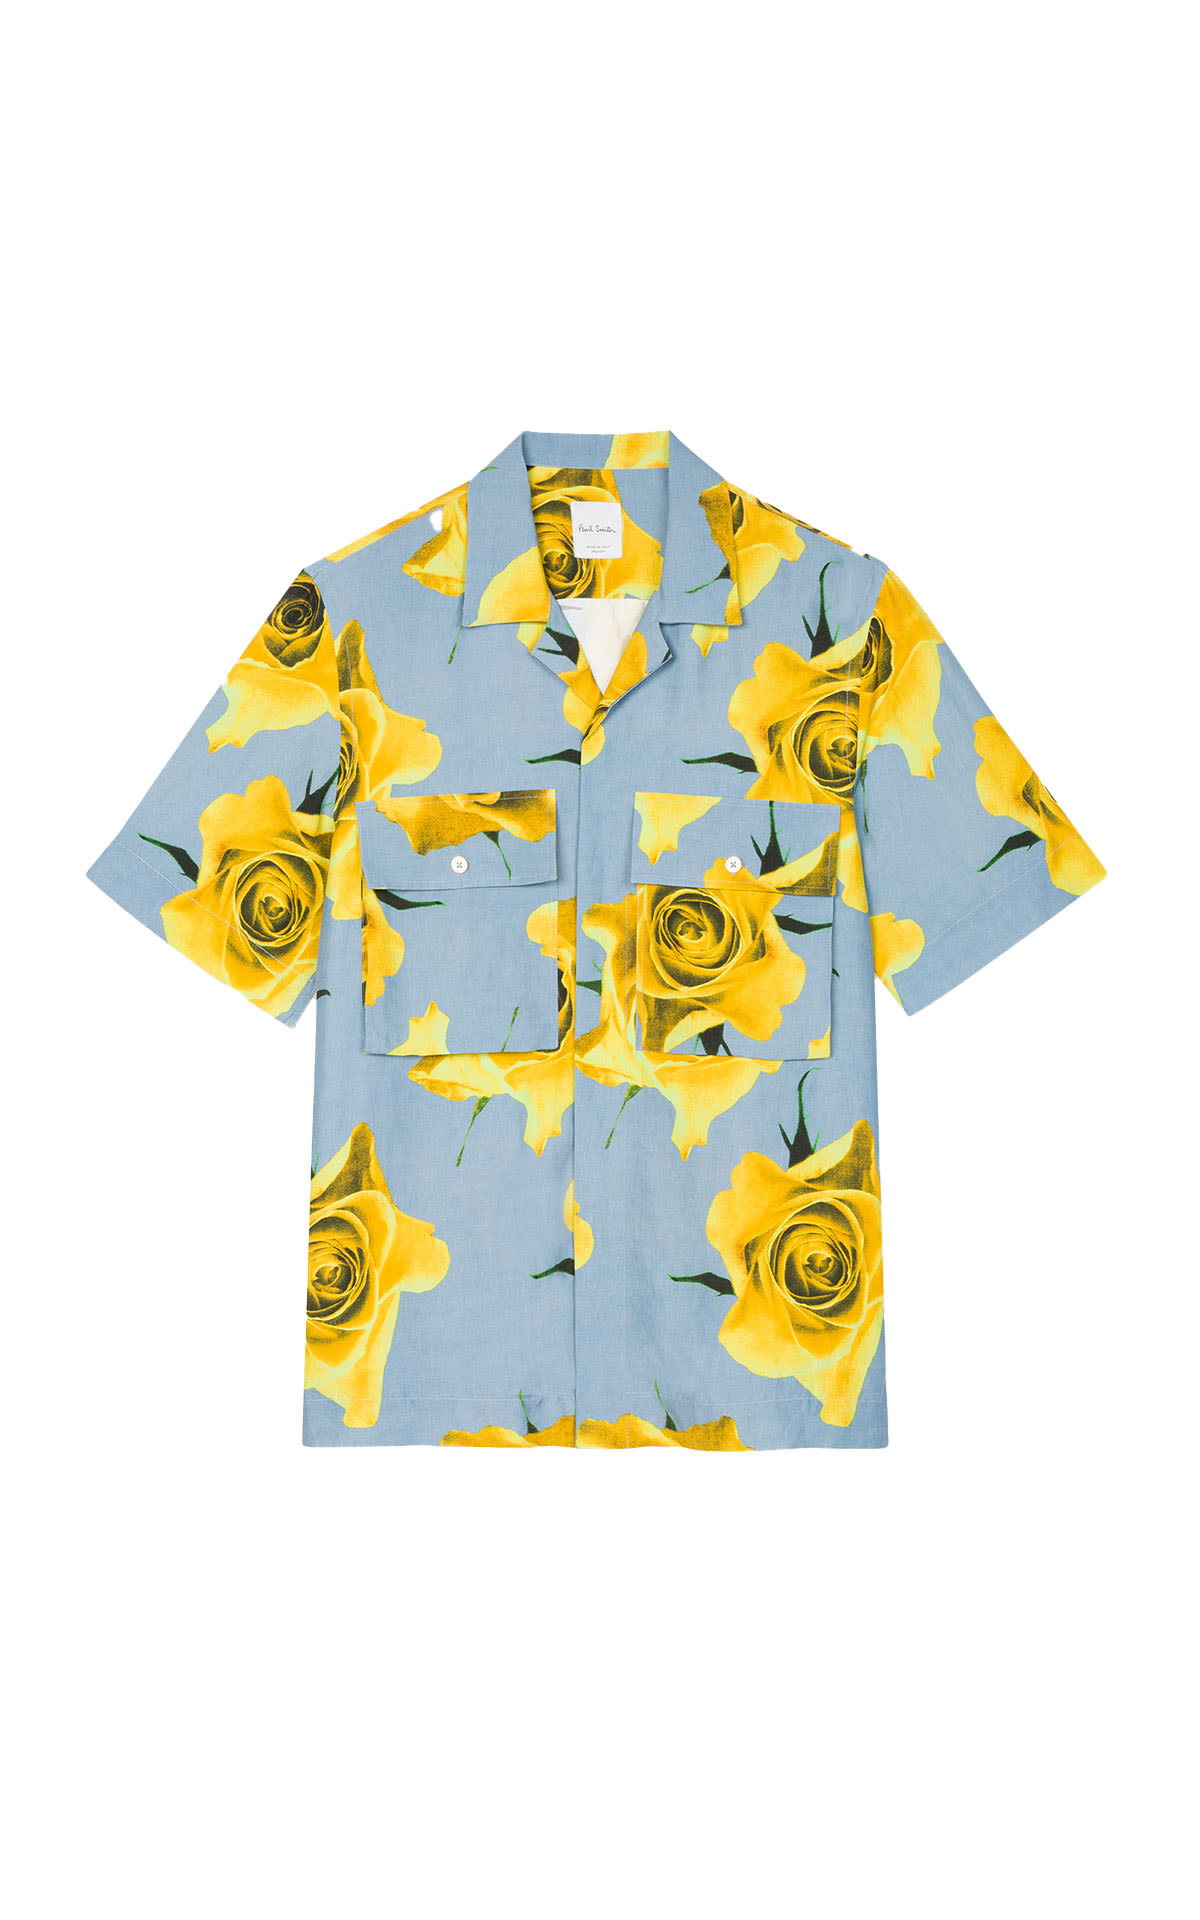 Paul Smith Roses shirt from Bicester Village